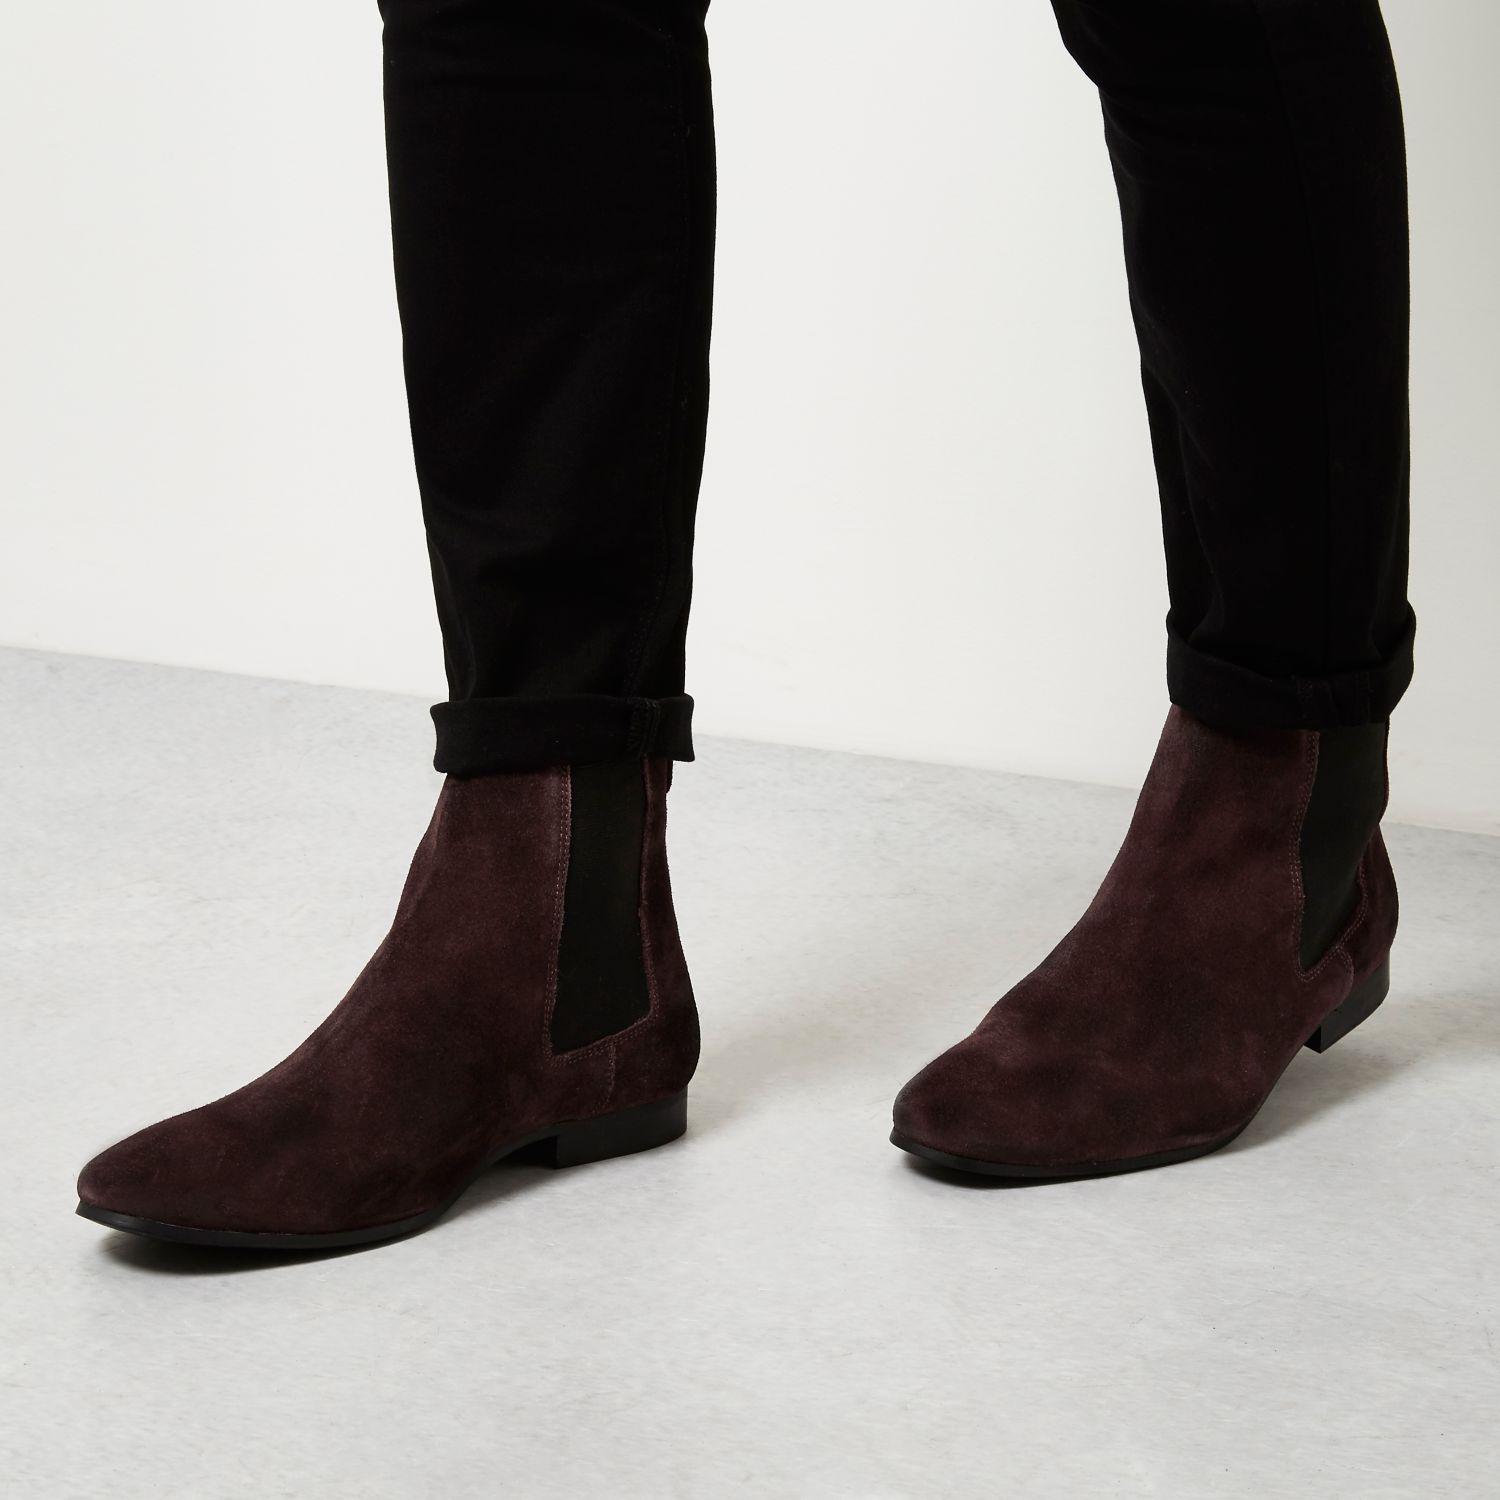 Lyst - River Island Burgundy Suede Tall Chelsea Boots in Red for Men